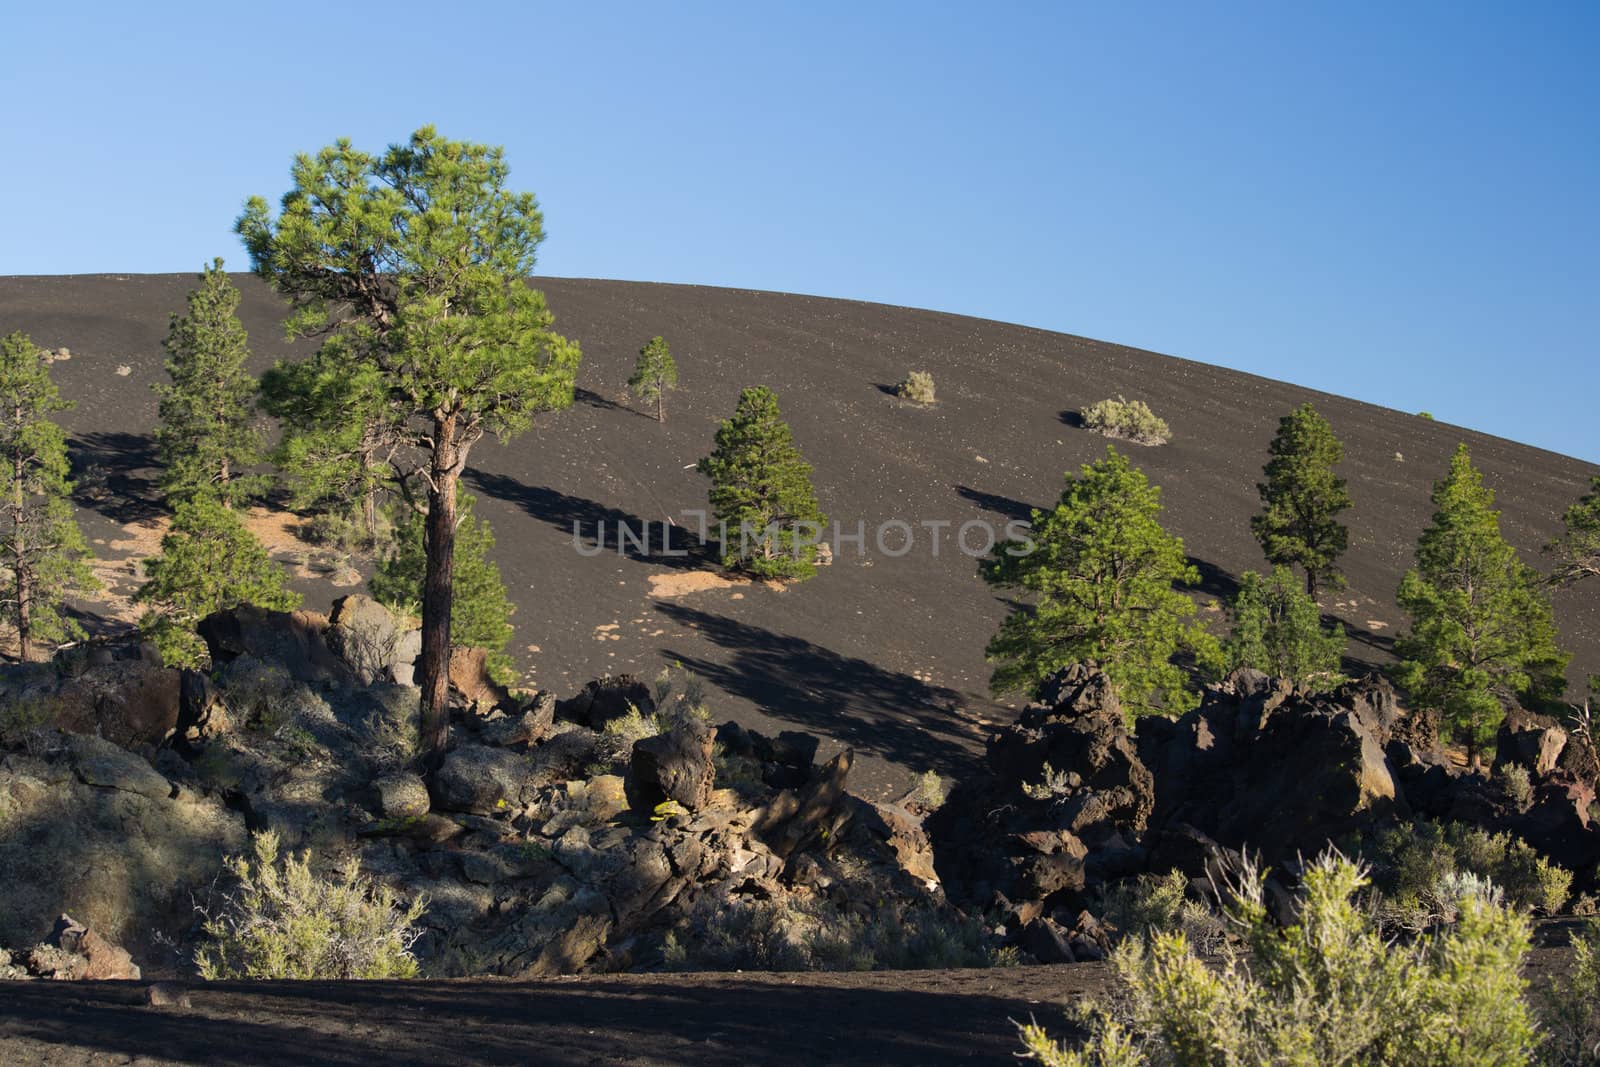 The black cinder from the volcano created a stark background for the pine trees growing on the stony soil.